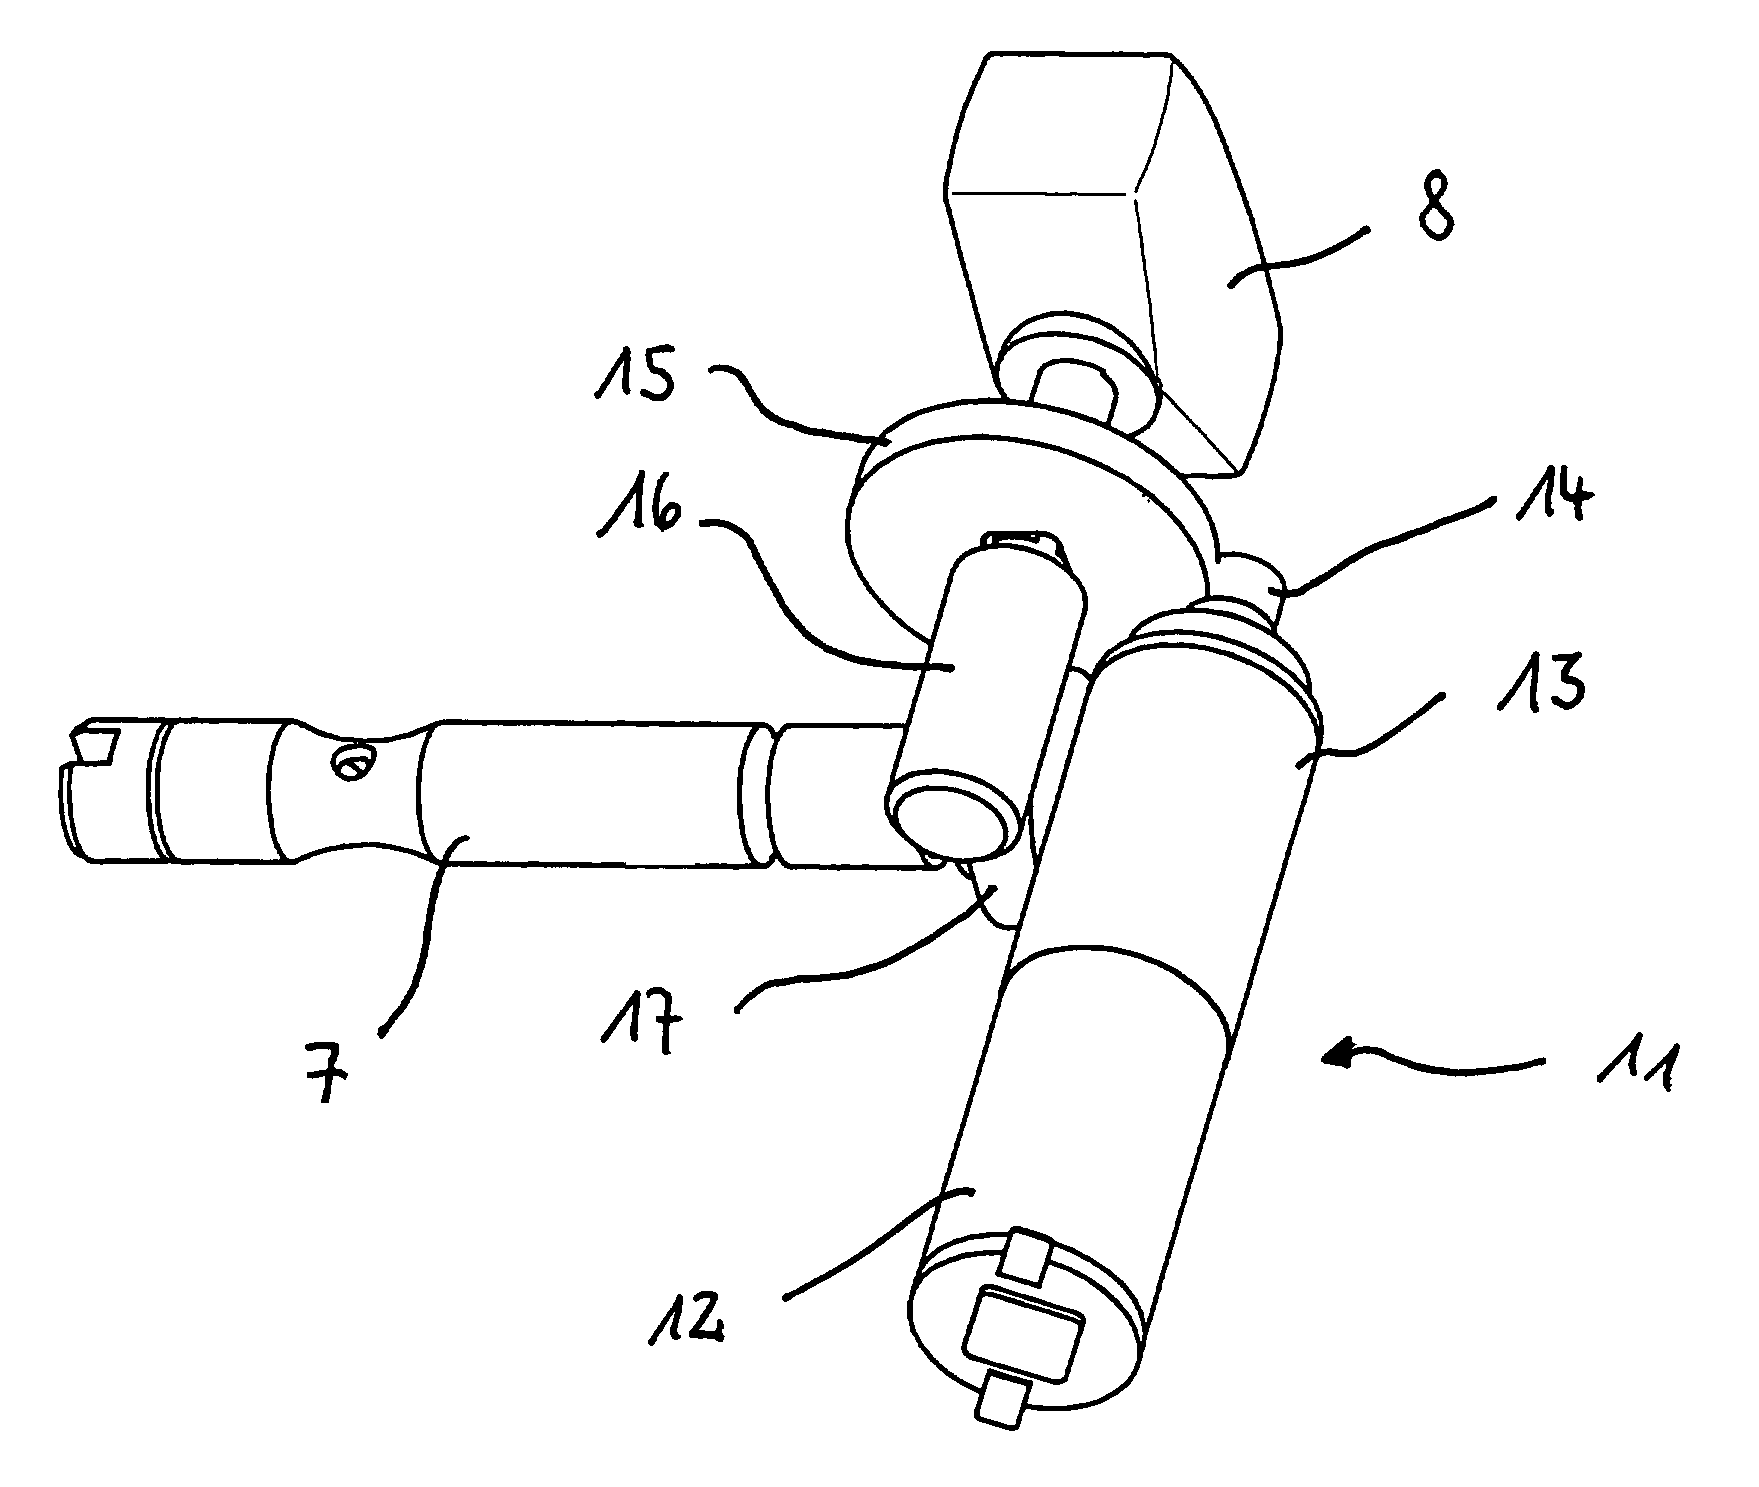 Device for adjusting the tension of the strings of a guitar or of a bass